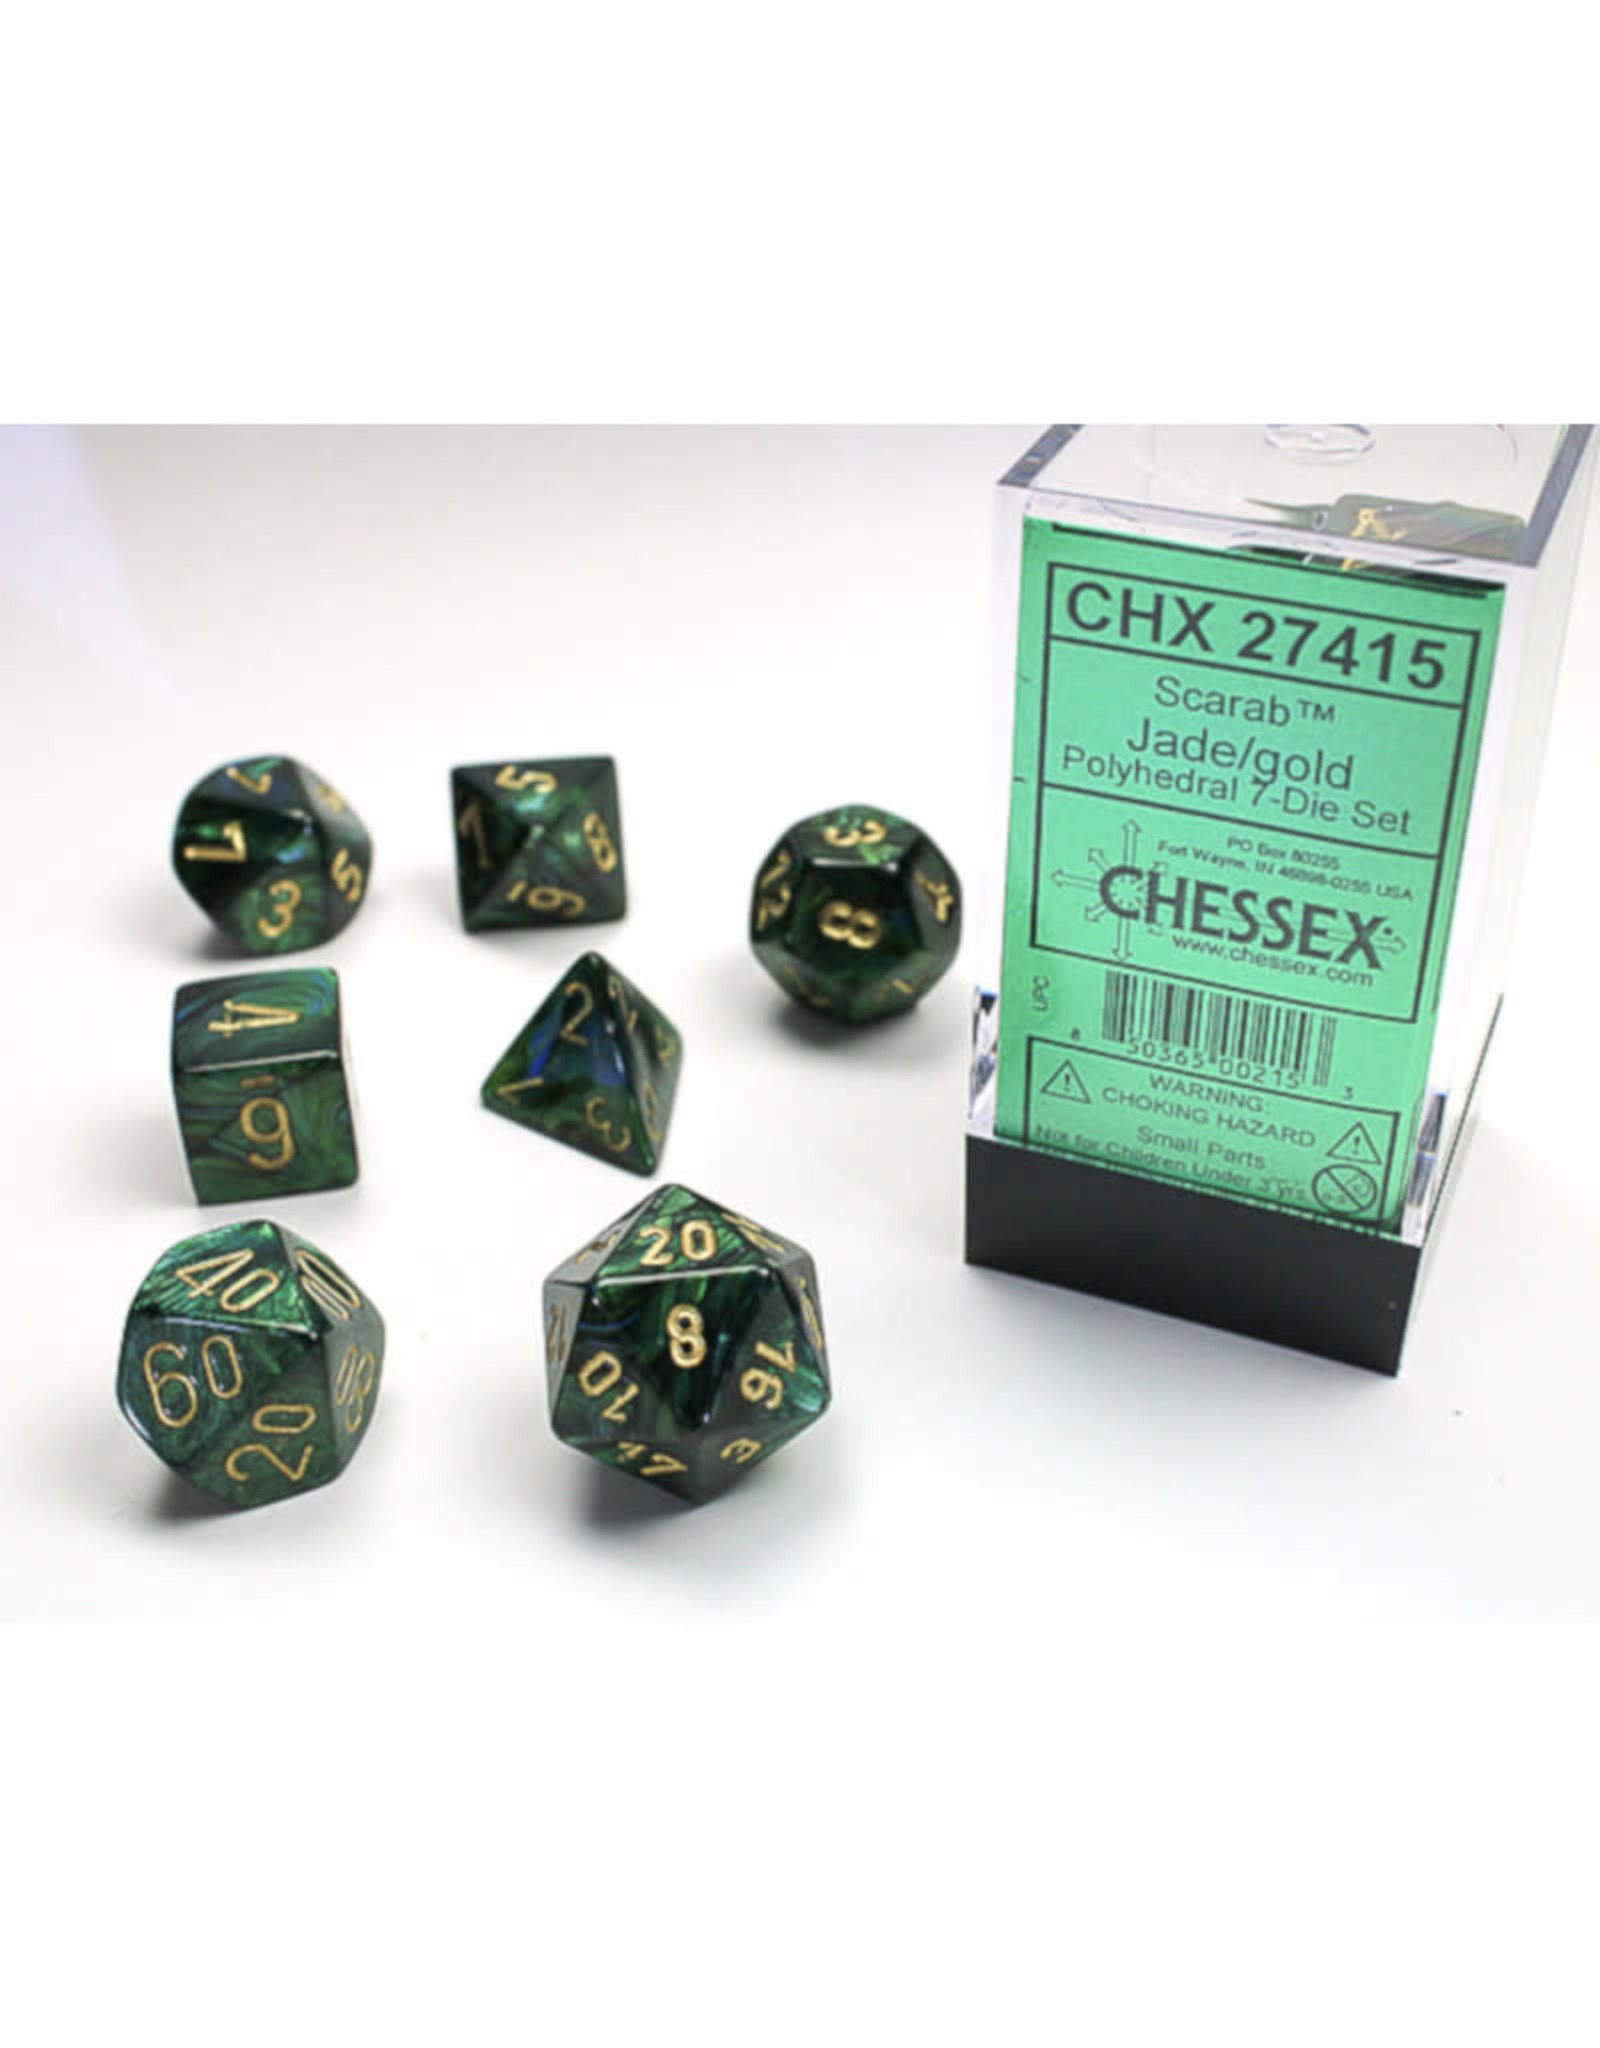 Chessex Polyhedral Dice Set: Scarab Dice Jade/Gold (7)